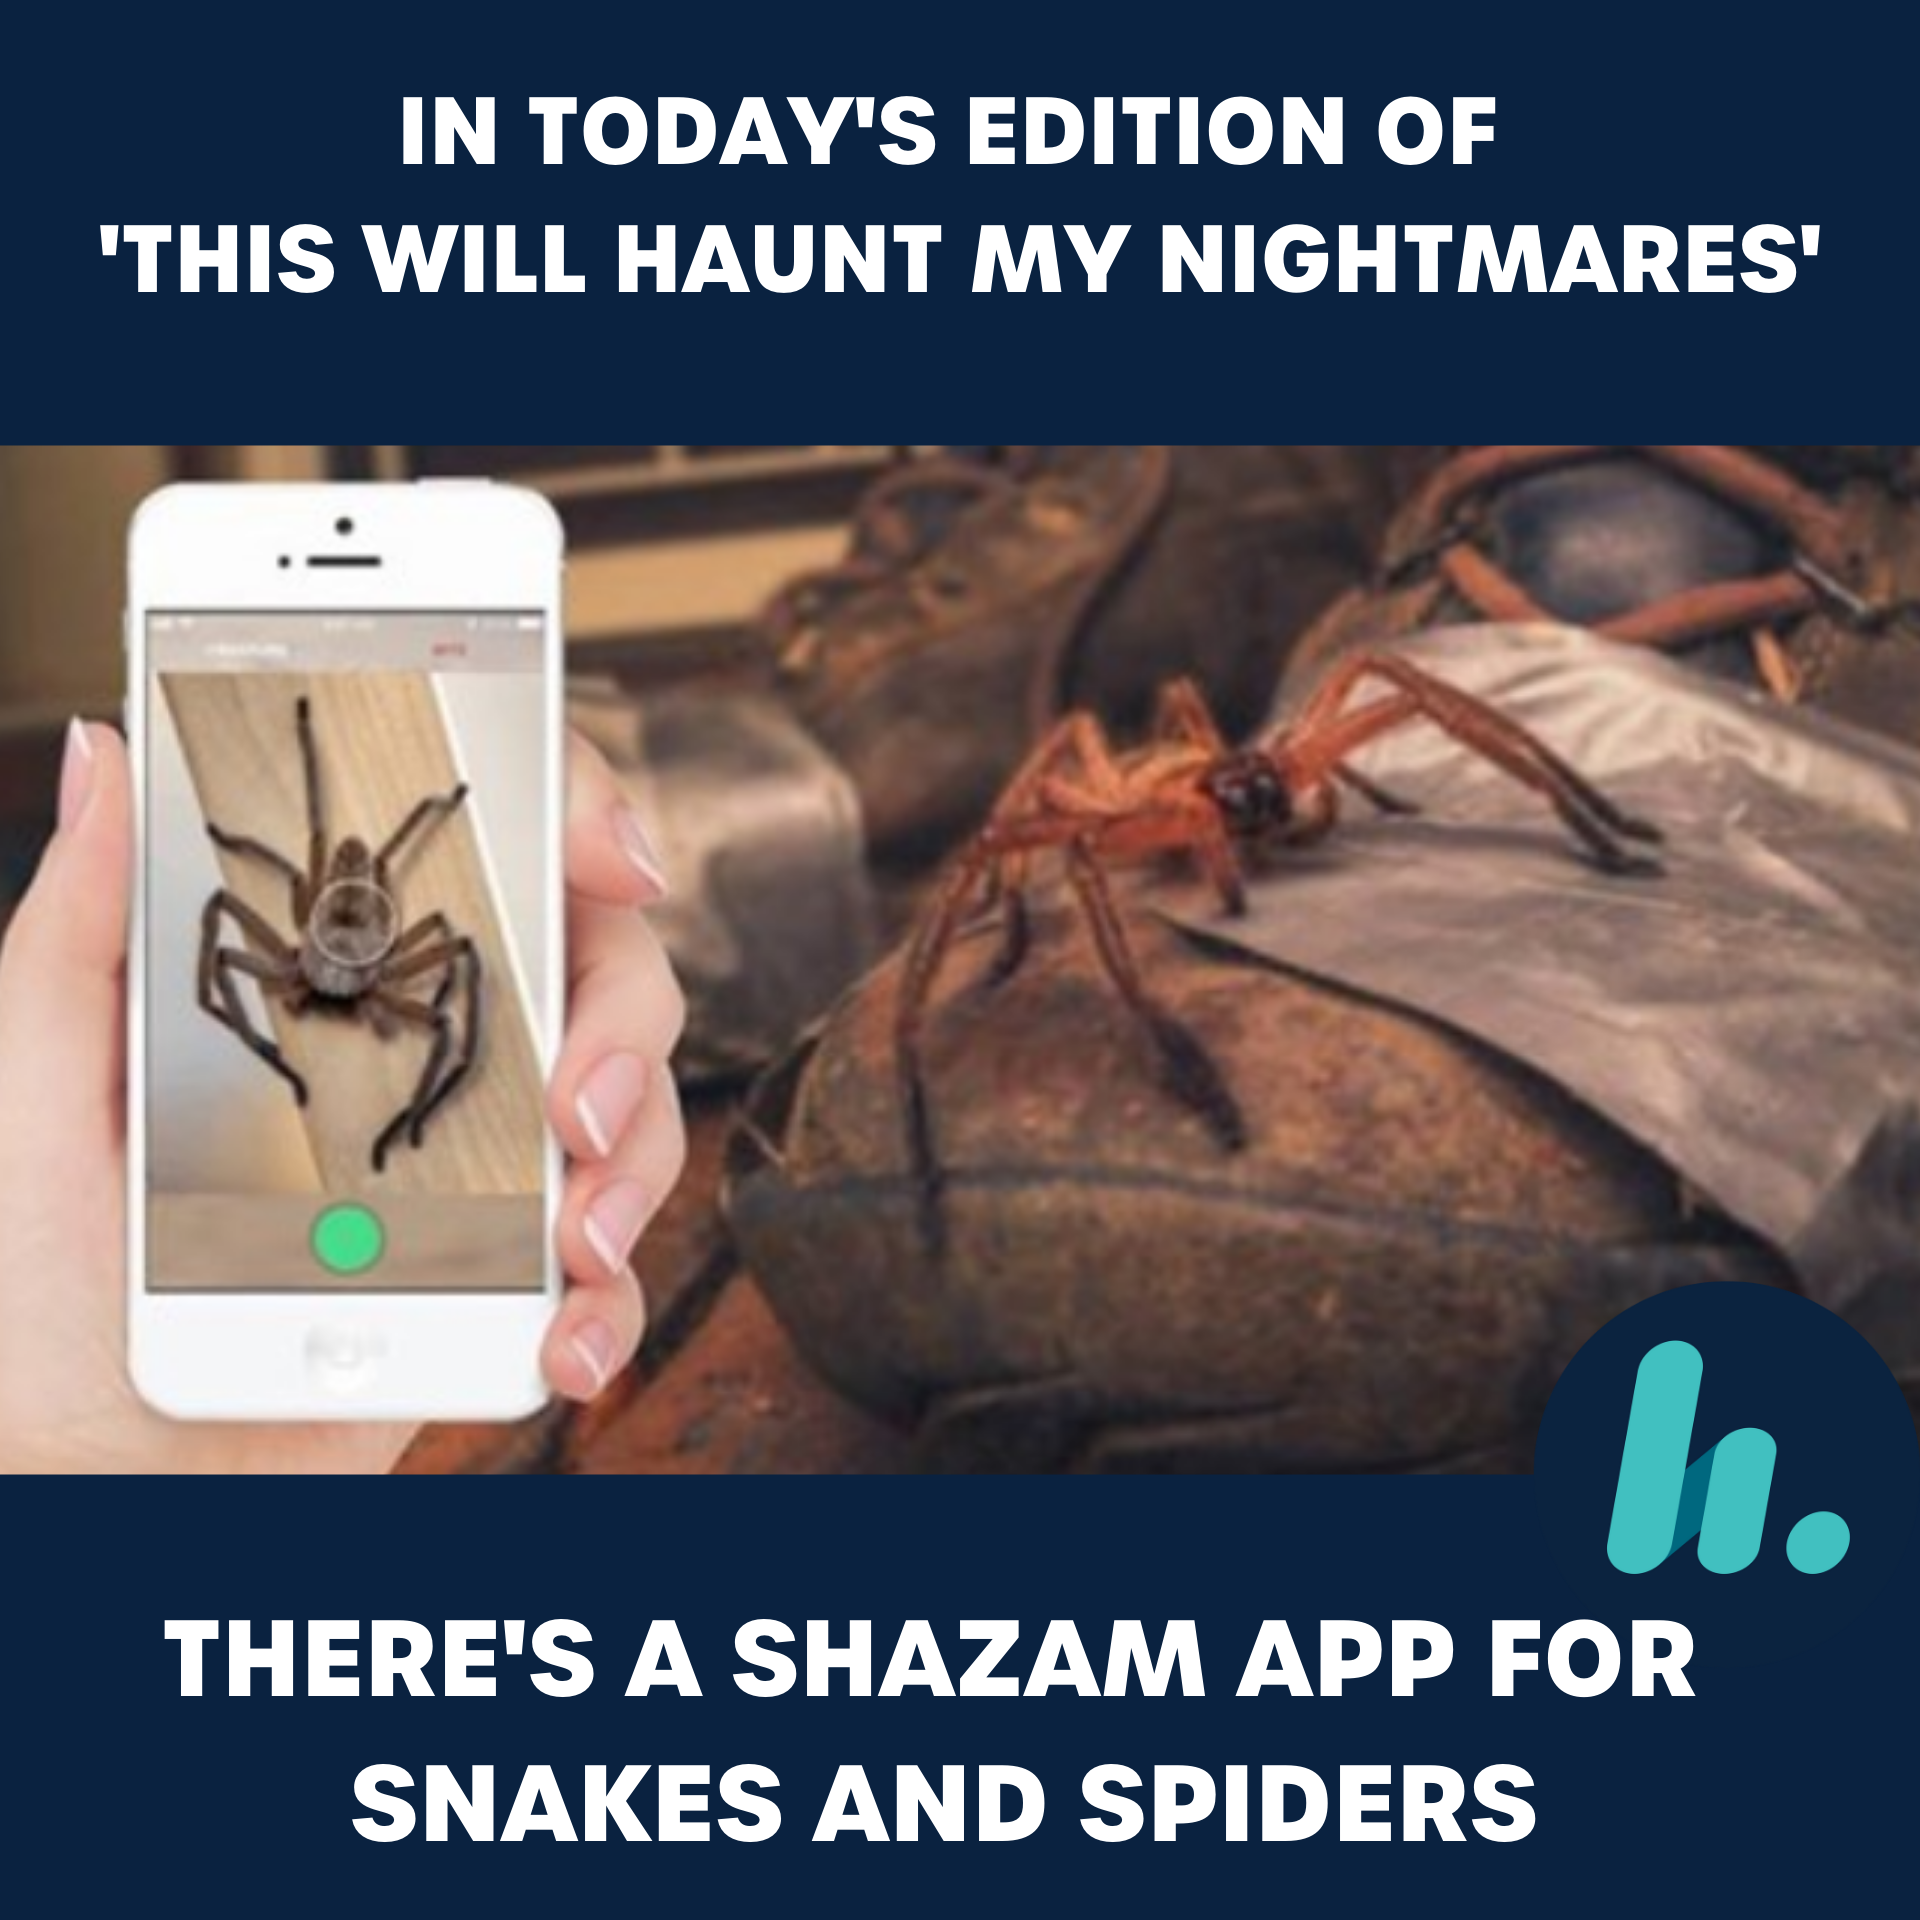 In today's edition of 'this will haunt your dreams,' there's a new shazam app for snakes and spiders